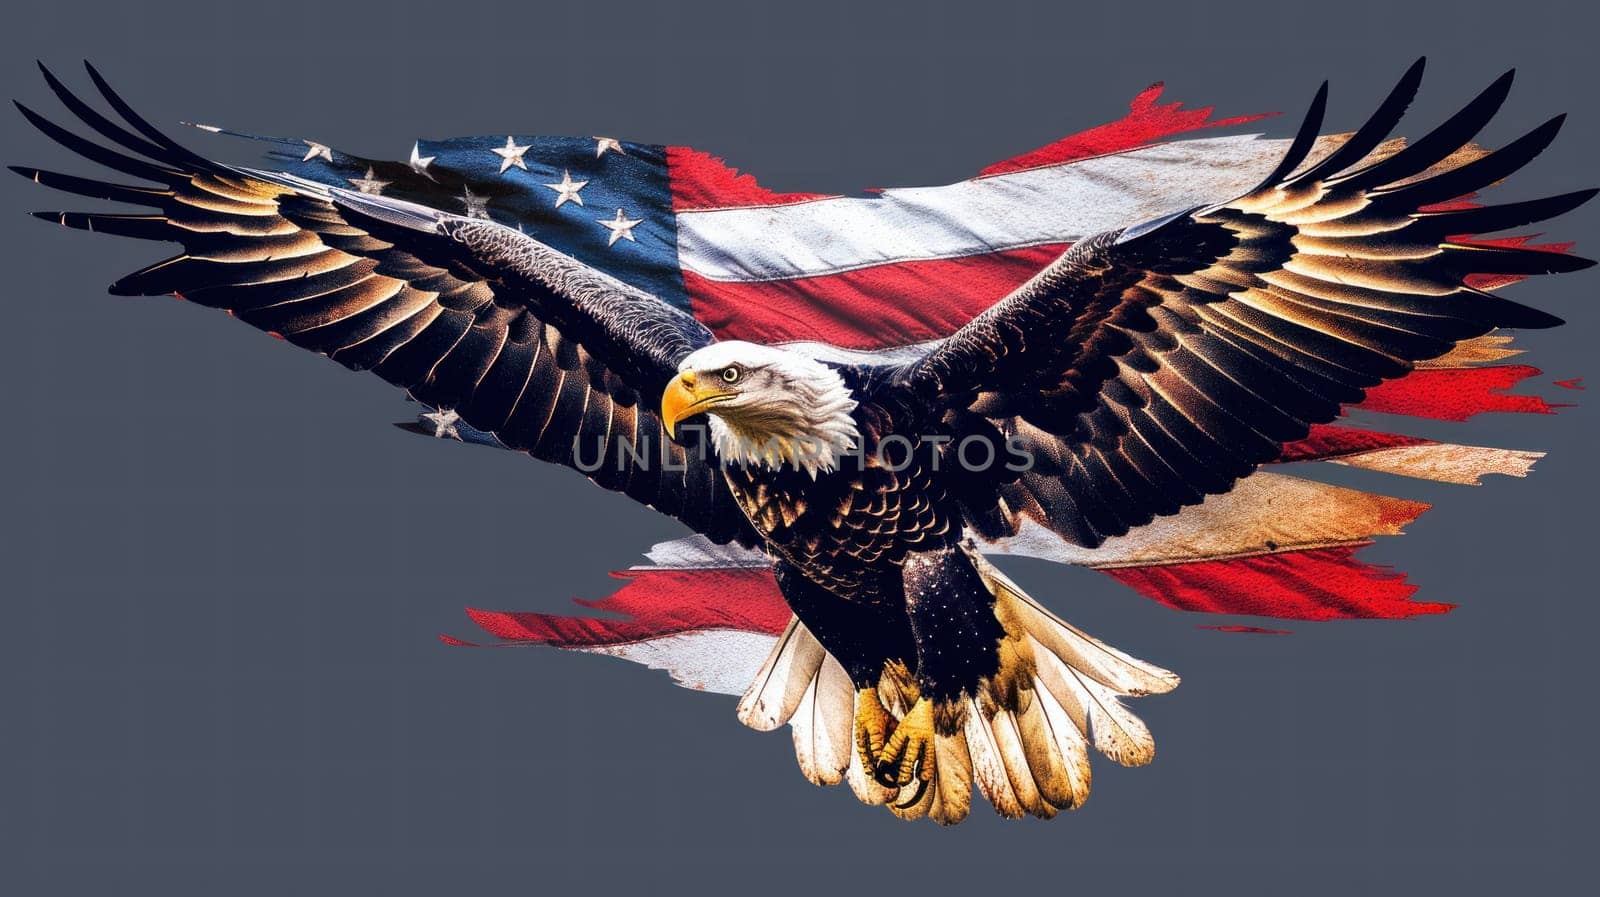 A large eagle is flying over a red, white, and blue American flag by golfmerrymaker